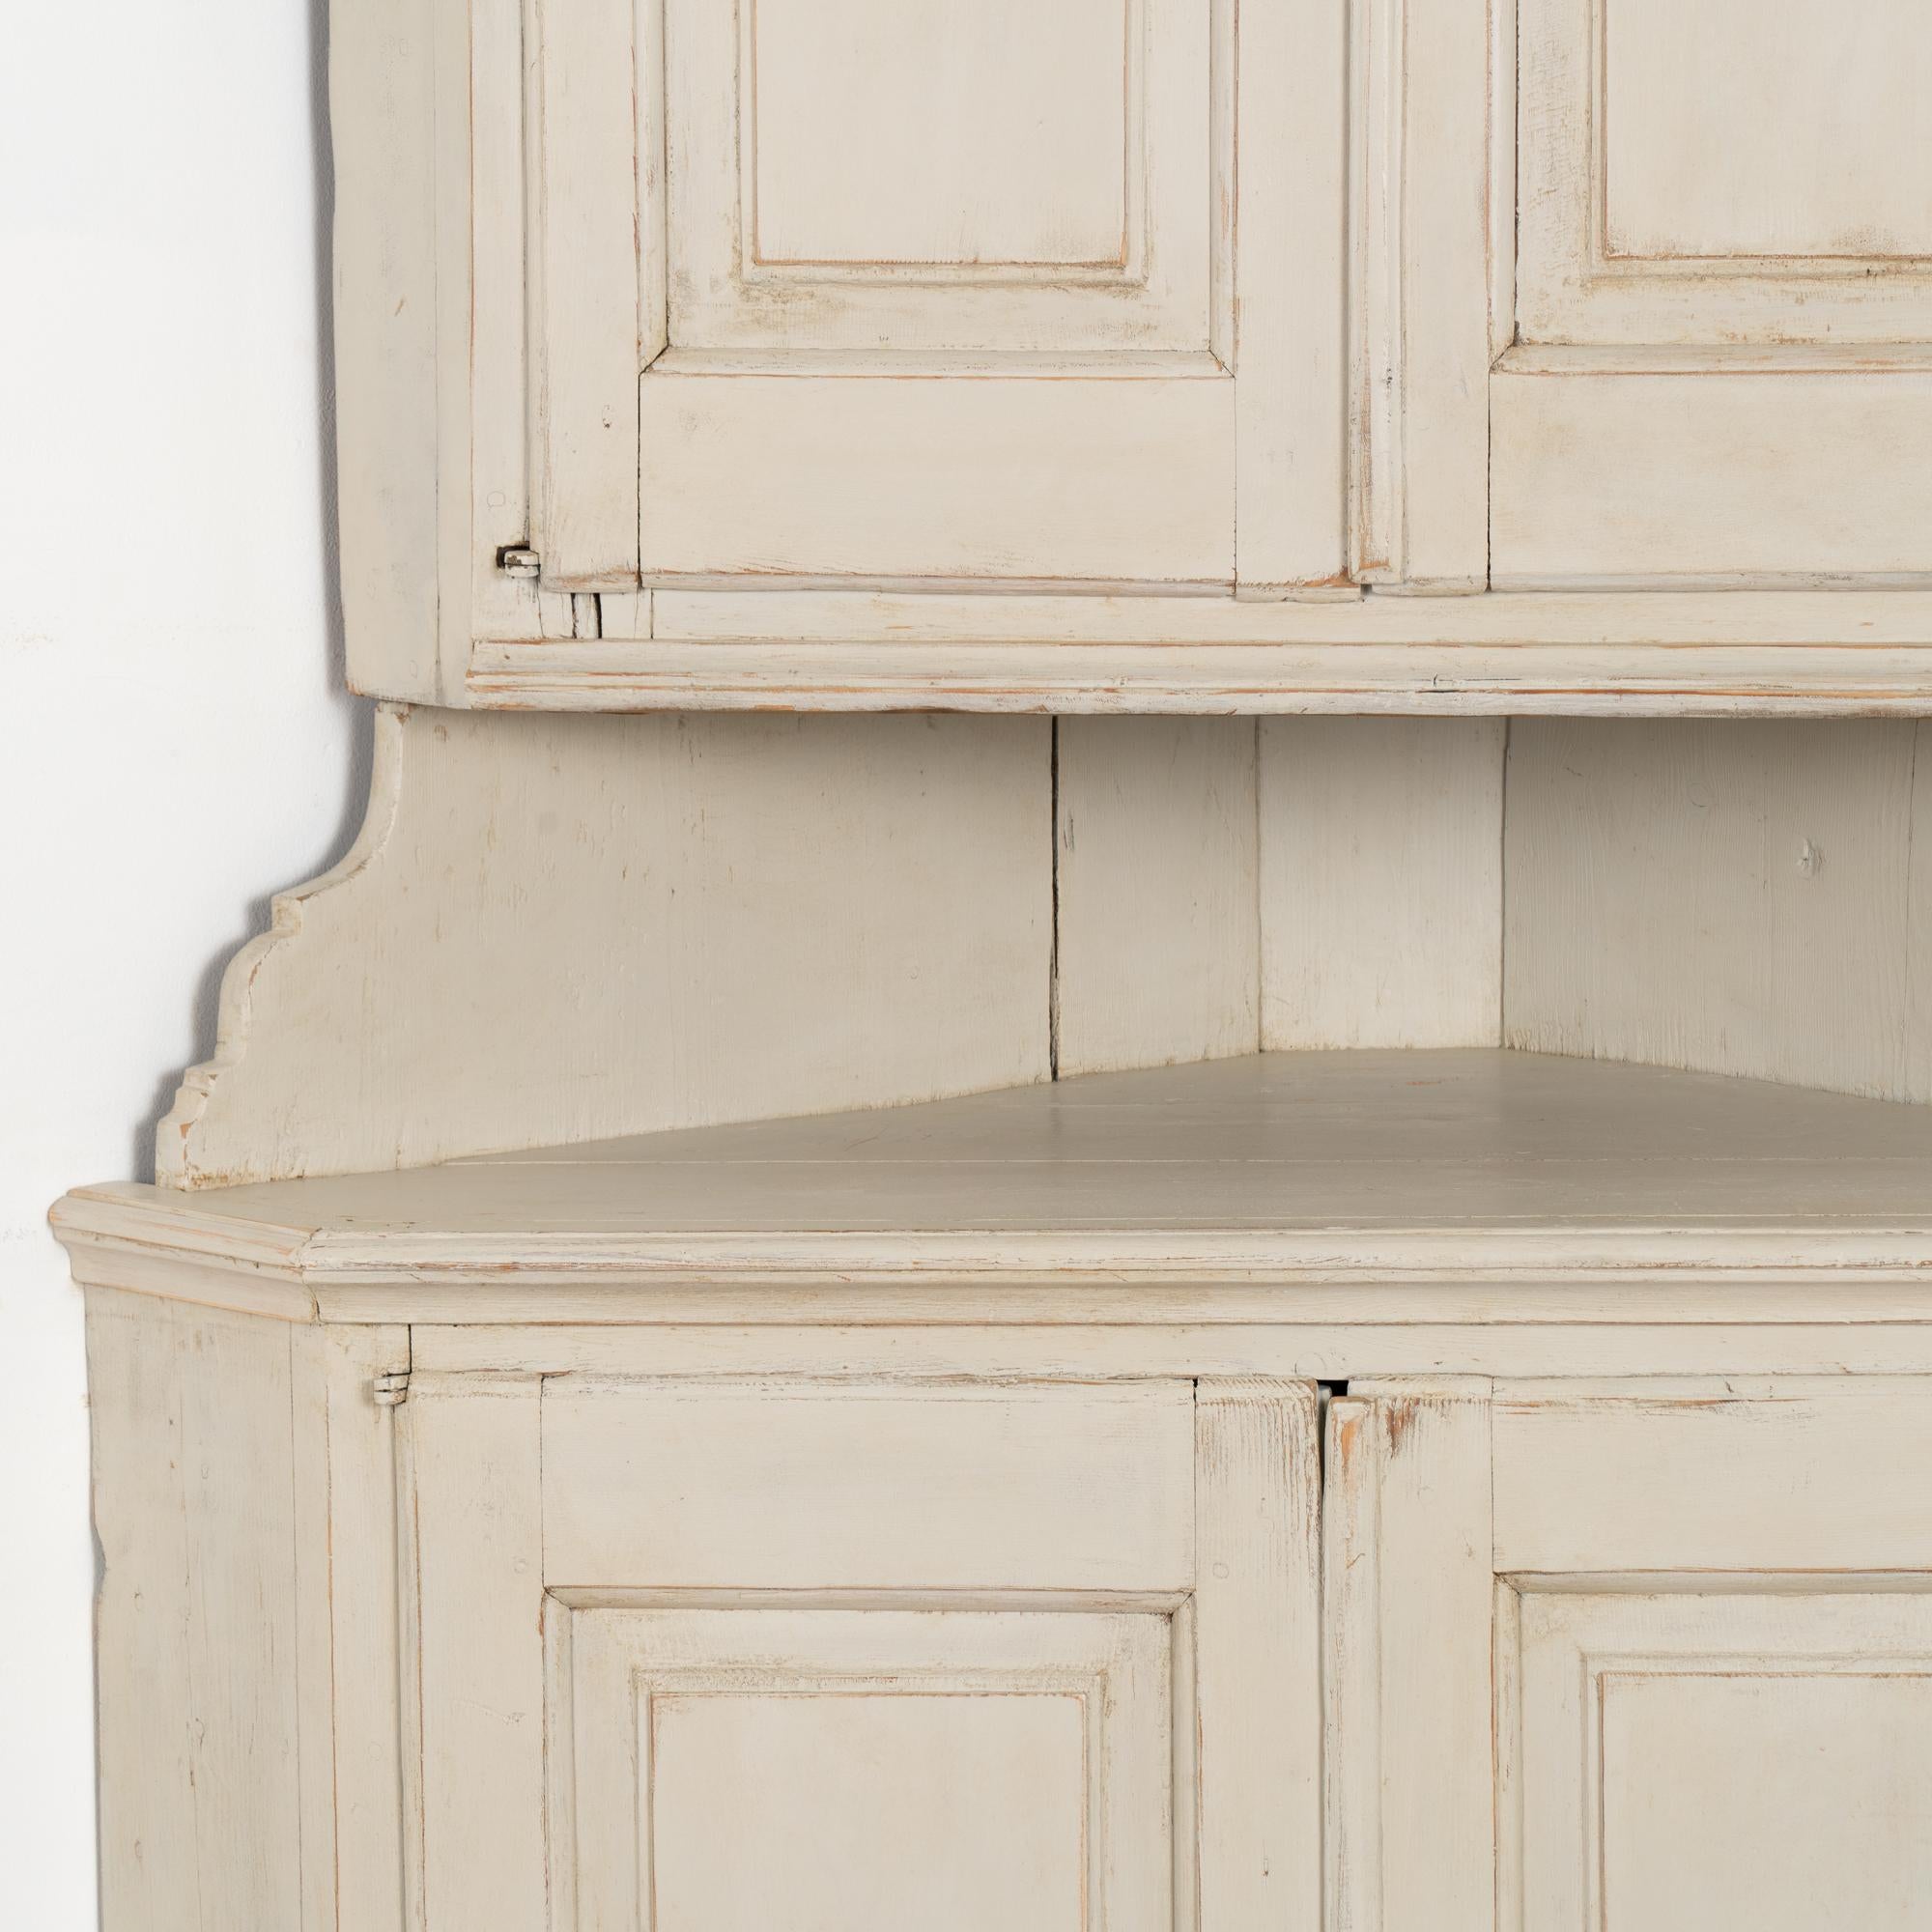 Swedish Antique White Painted Corner Cabinet Cupboard, Sweden circa 1840-60 For Sale